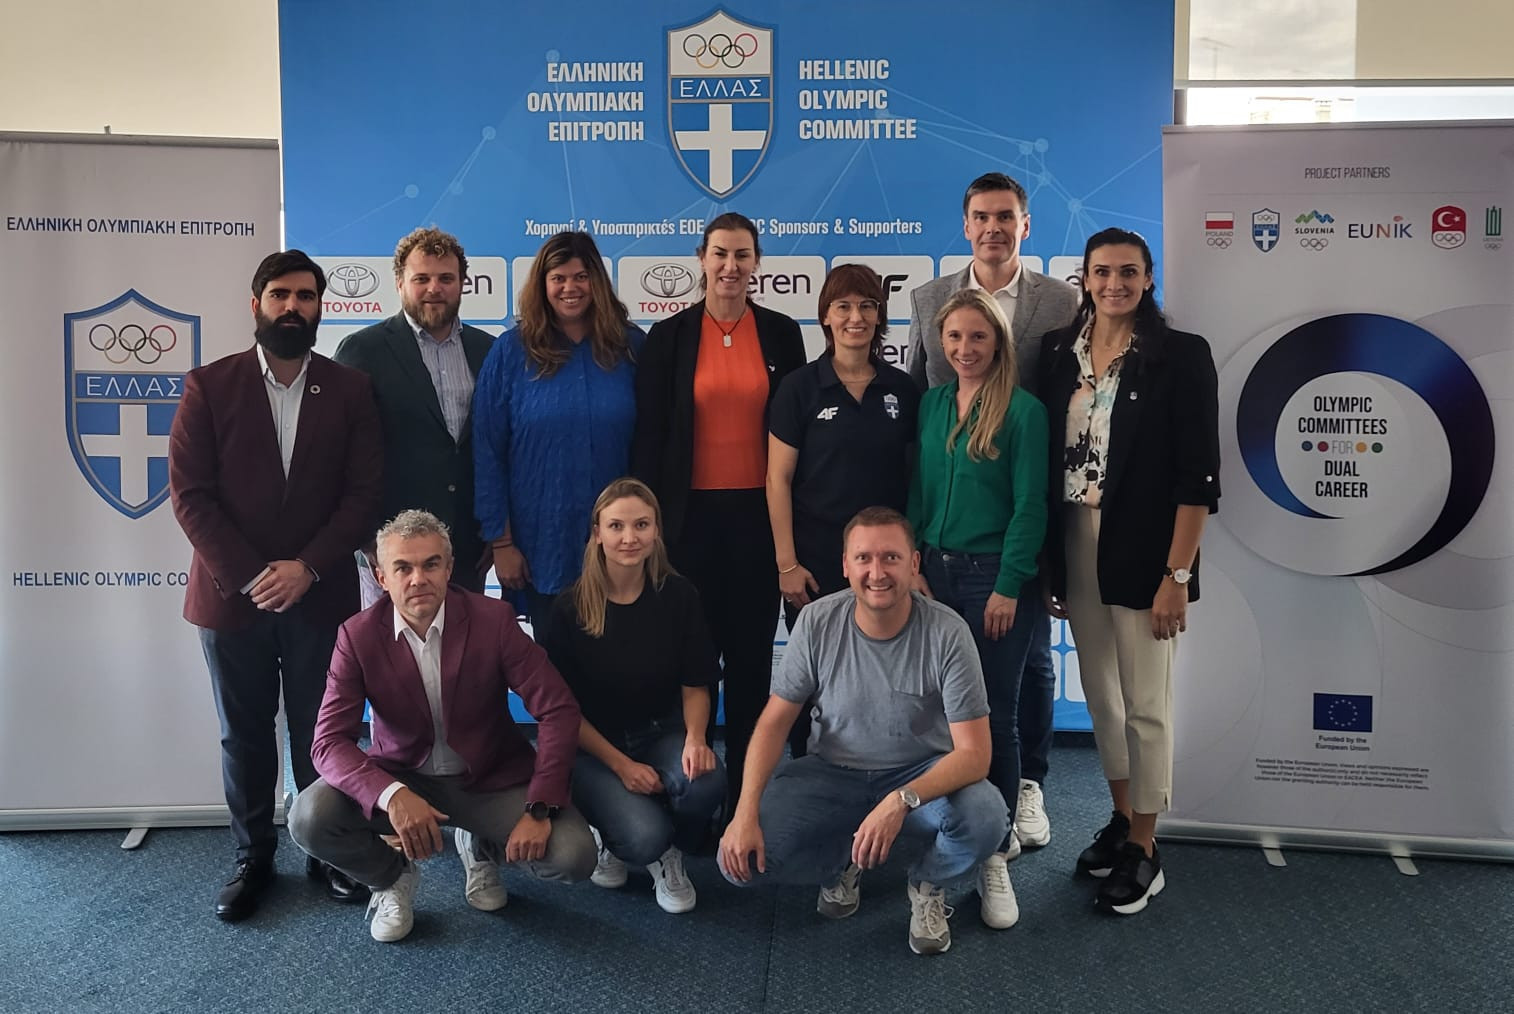 Representatives of anti-doping bodies from around the world convened in Athens to discuss the European Olympic Committees for Dual Career project ©HOC